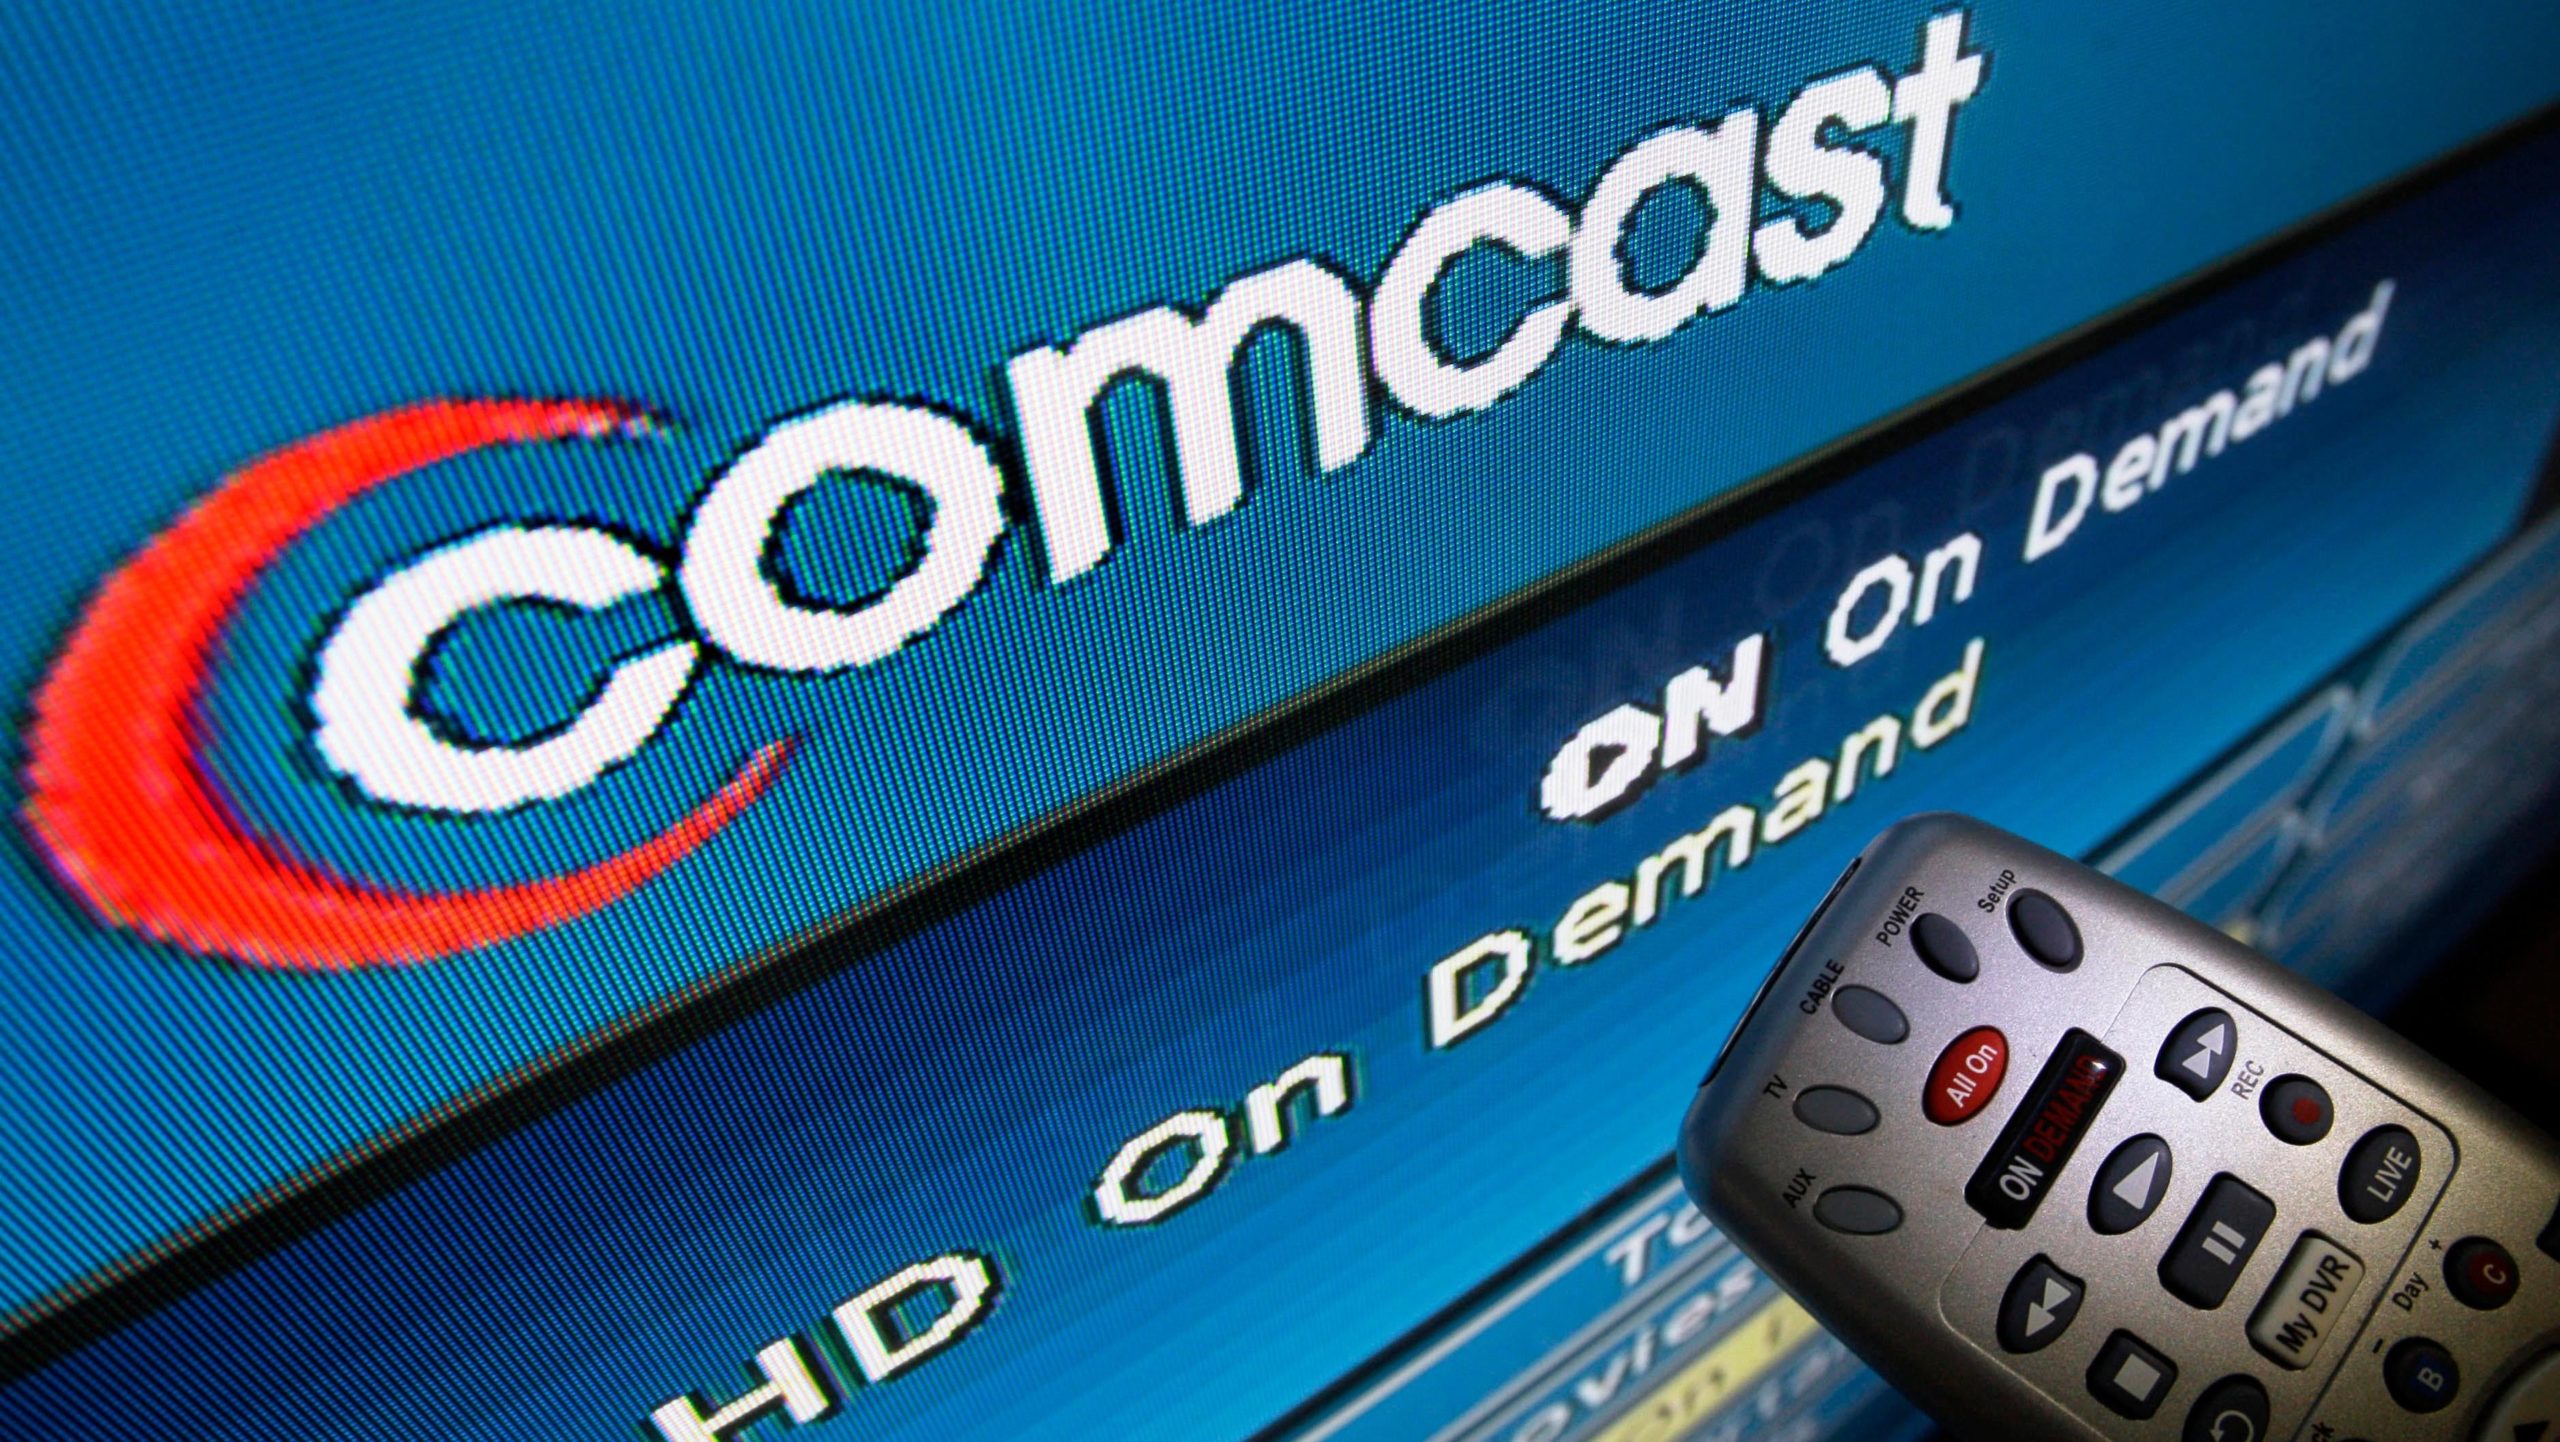 In this Aug. 6, 2009 file photo, the Comcast logo is displayed on a TV set in North Andover, Mass. (Photo: Elise Amendola, AP)